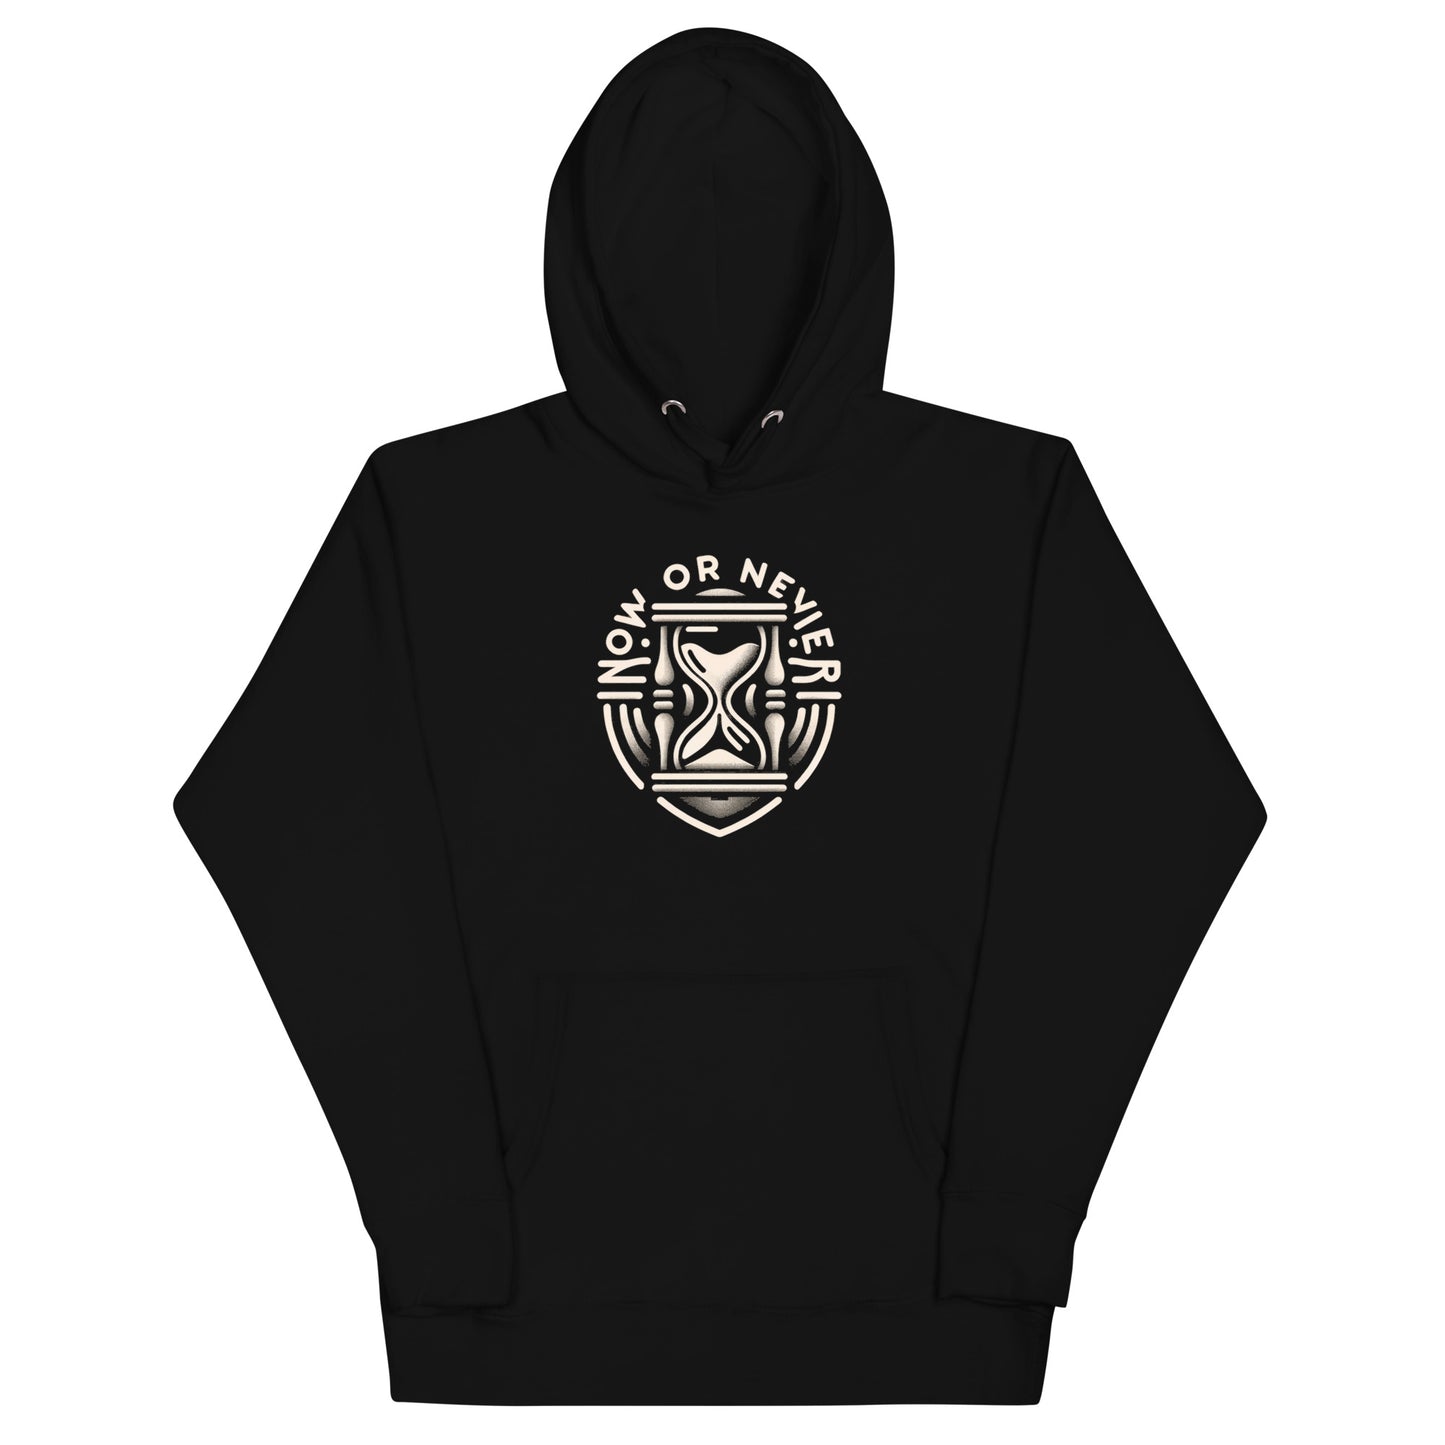 "Now or Never" Hoodie